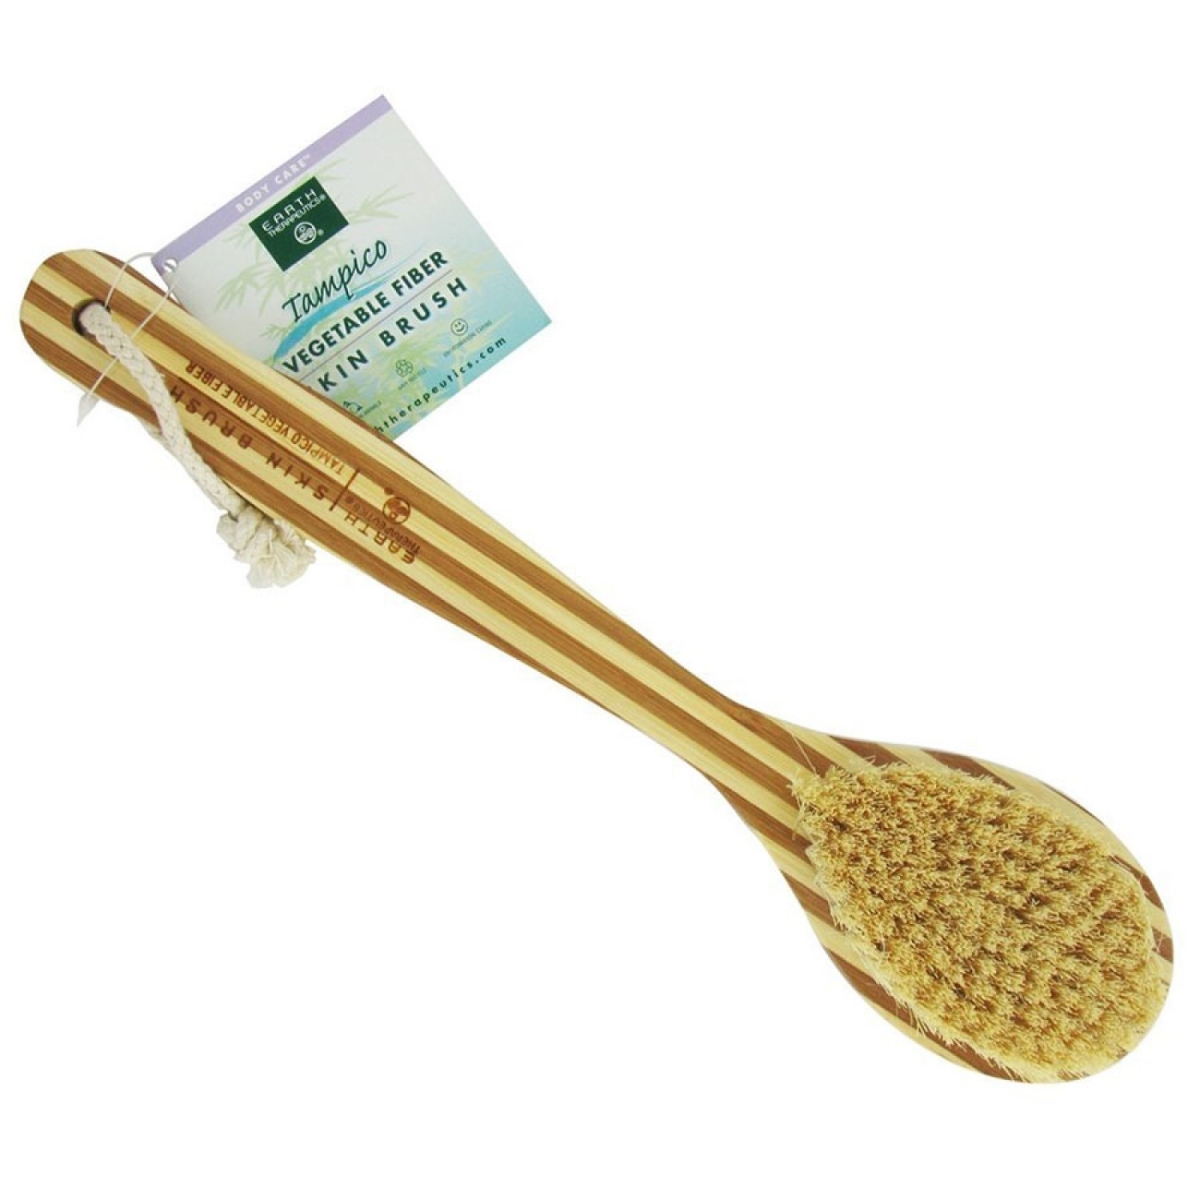 Picture of Frontier 221786 16 in. Earth Therapeutics Tampico Vegetable Fiber Skin Brush